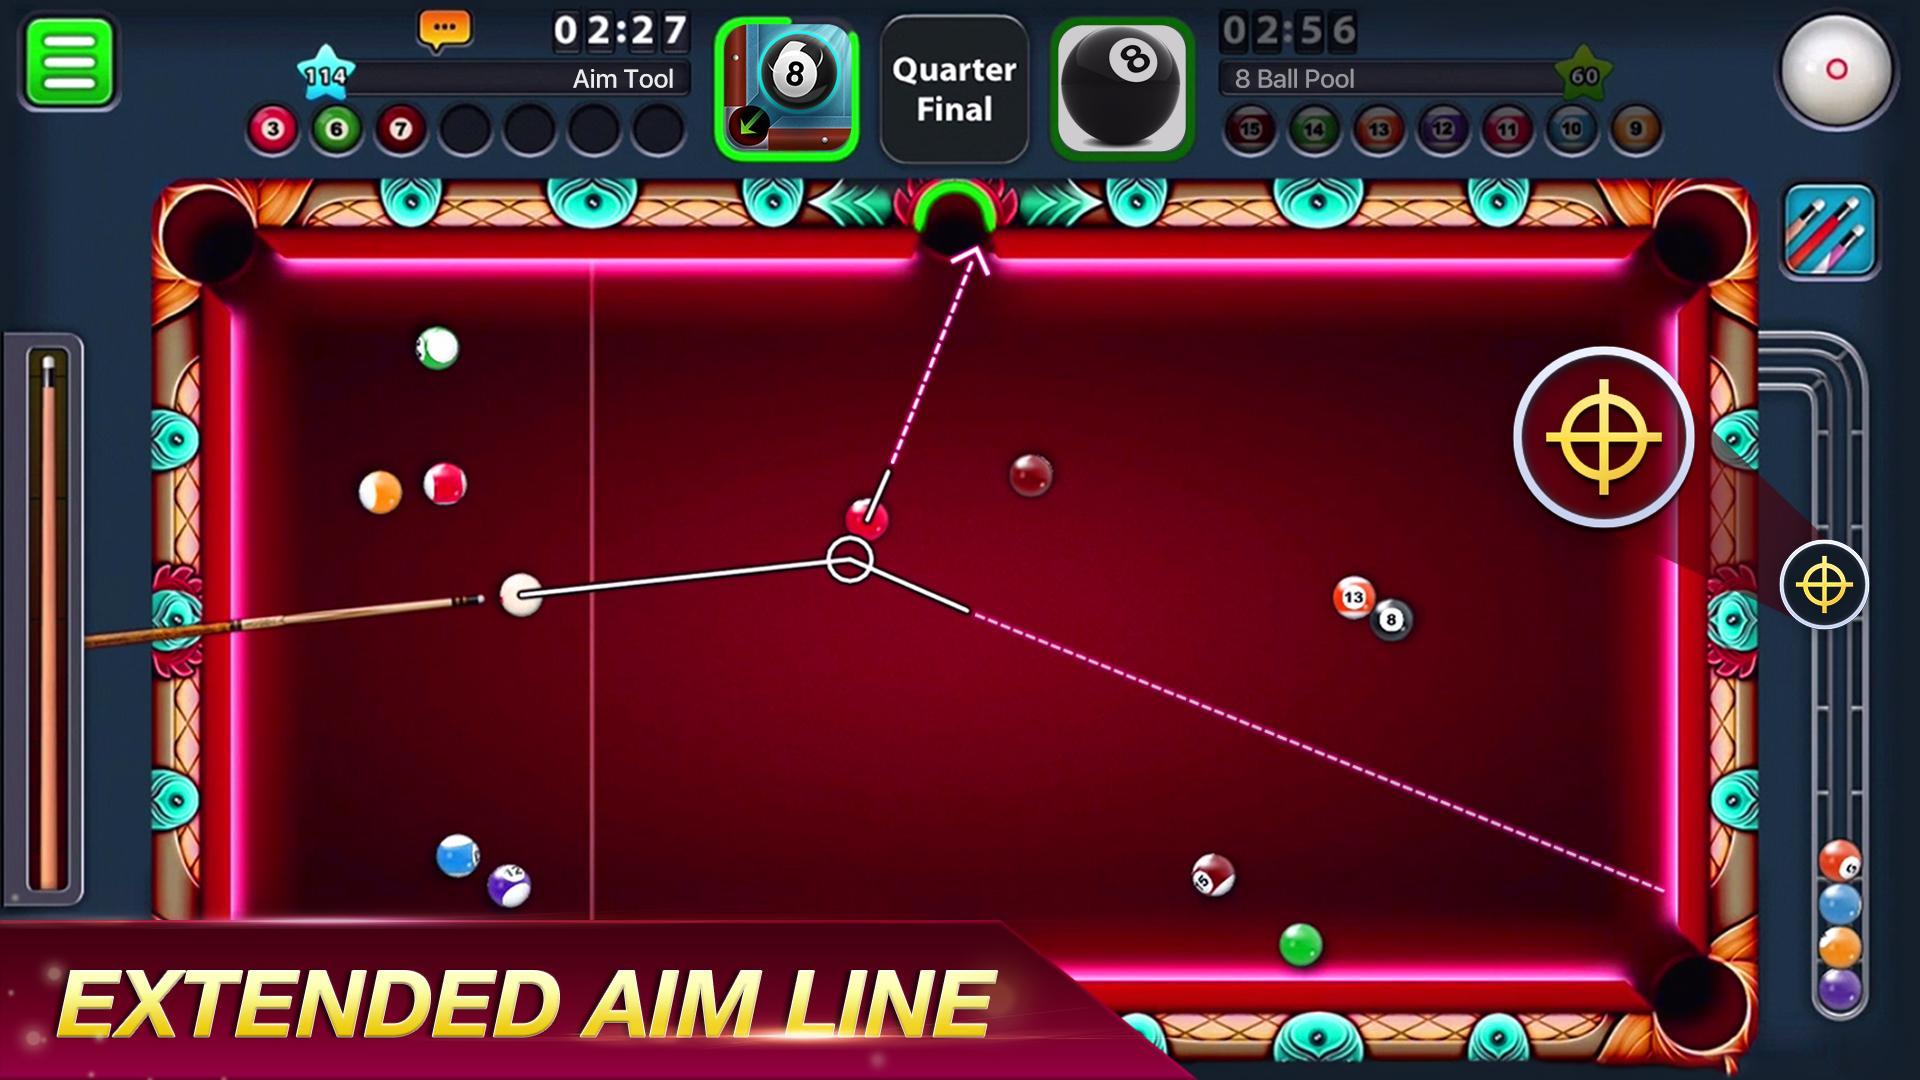 Aim Tool for 8 Ball Pool for Android - APK Download